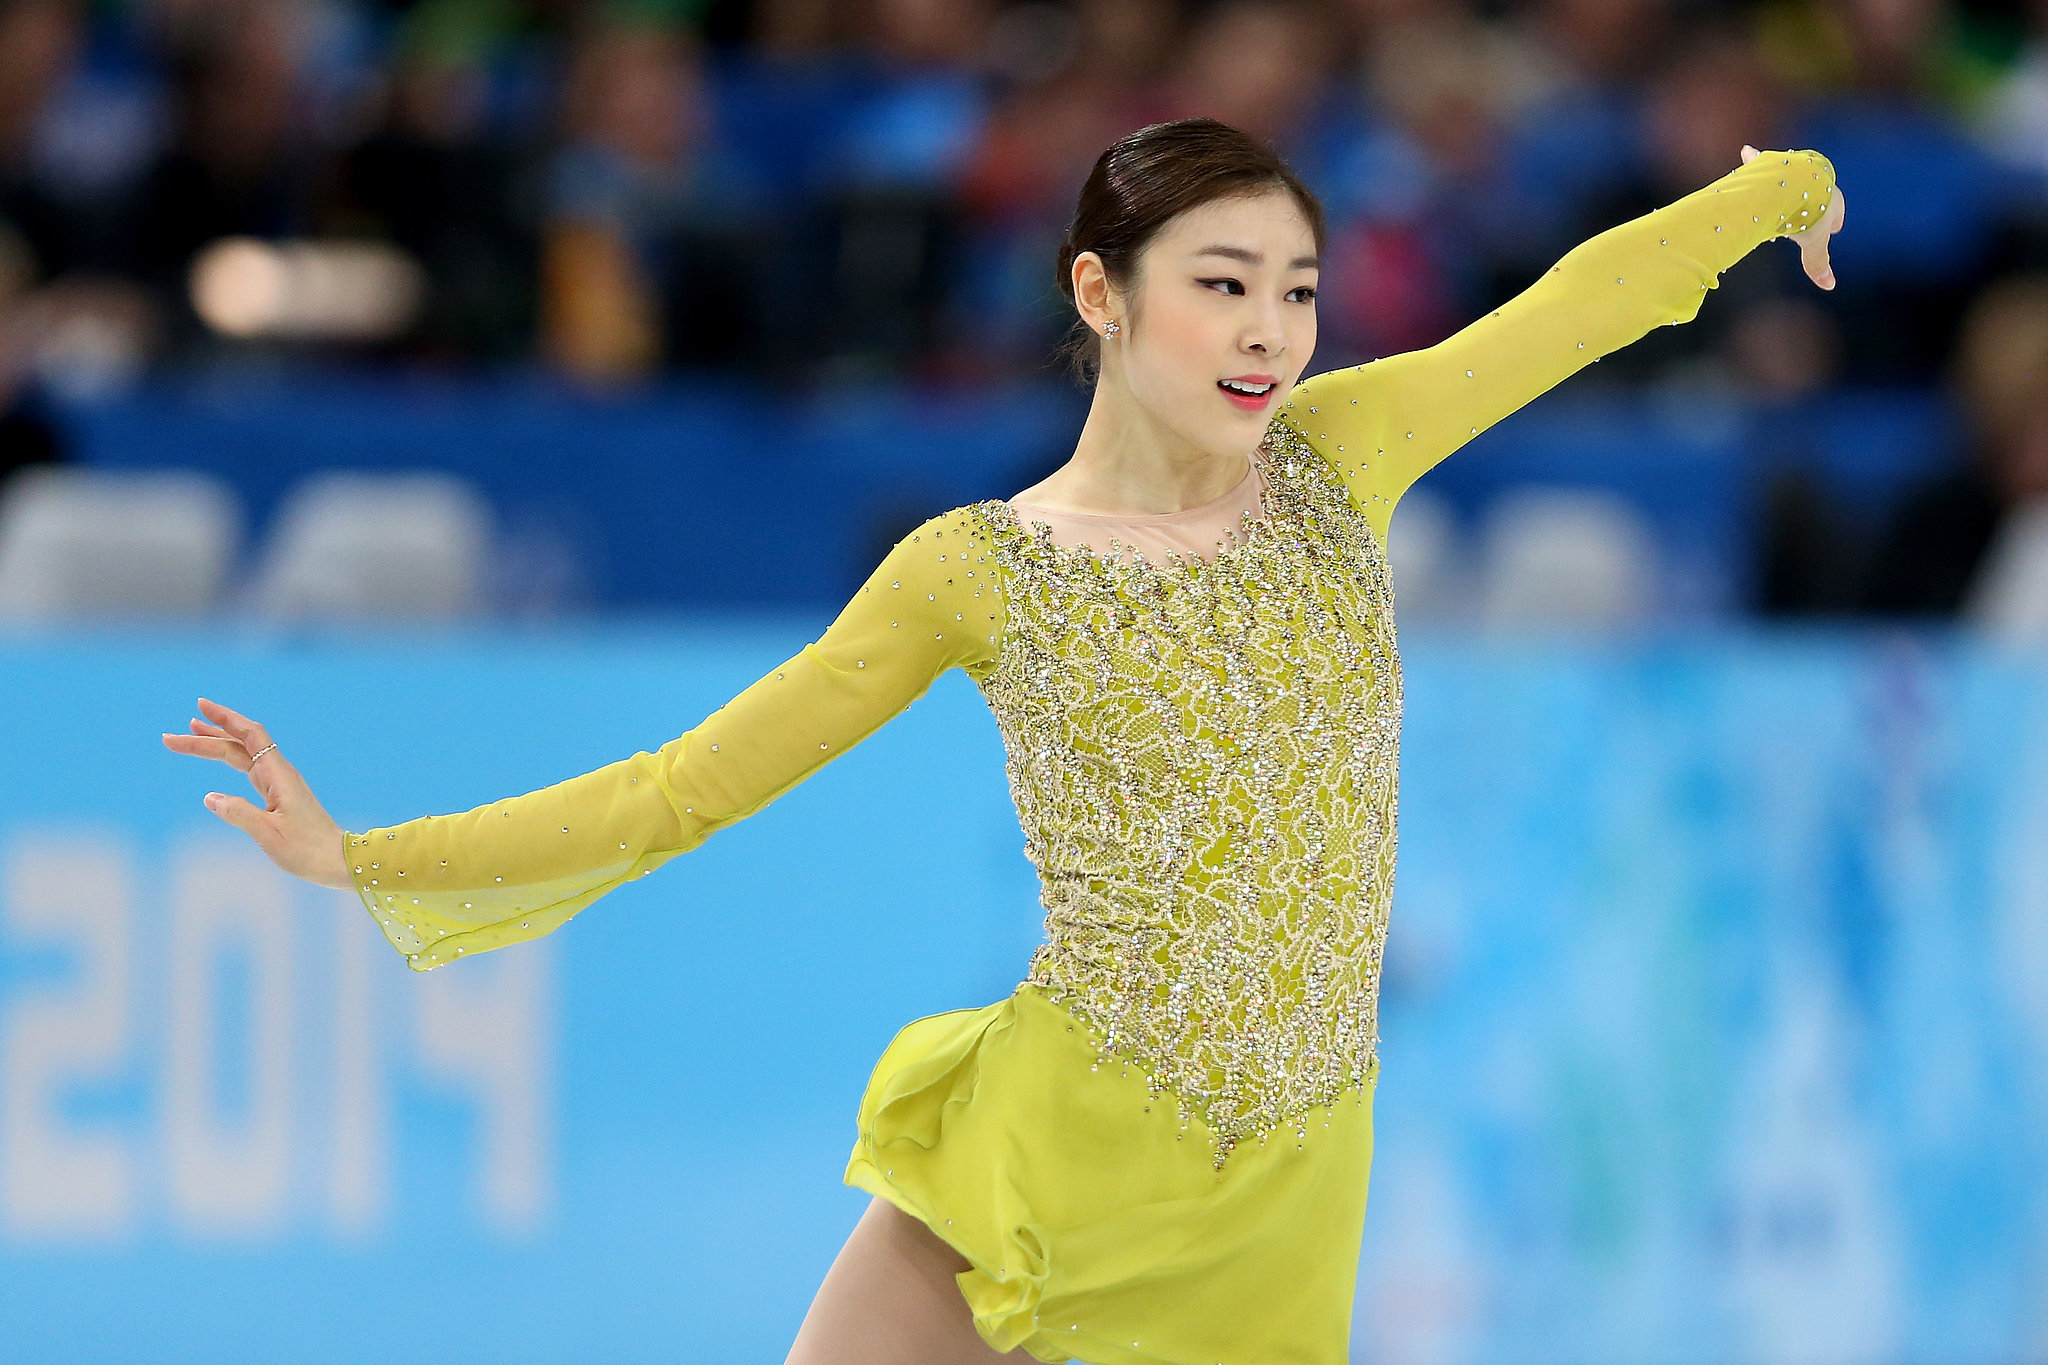 Yuna Kim Is the Favorite Everything You Need to Know Before the